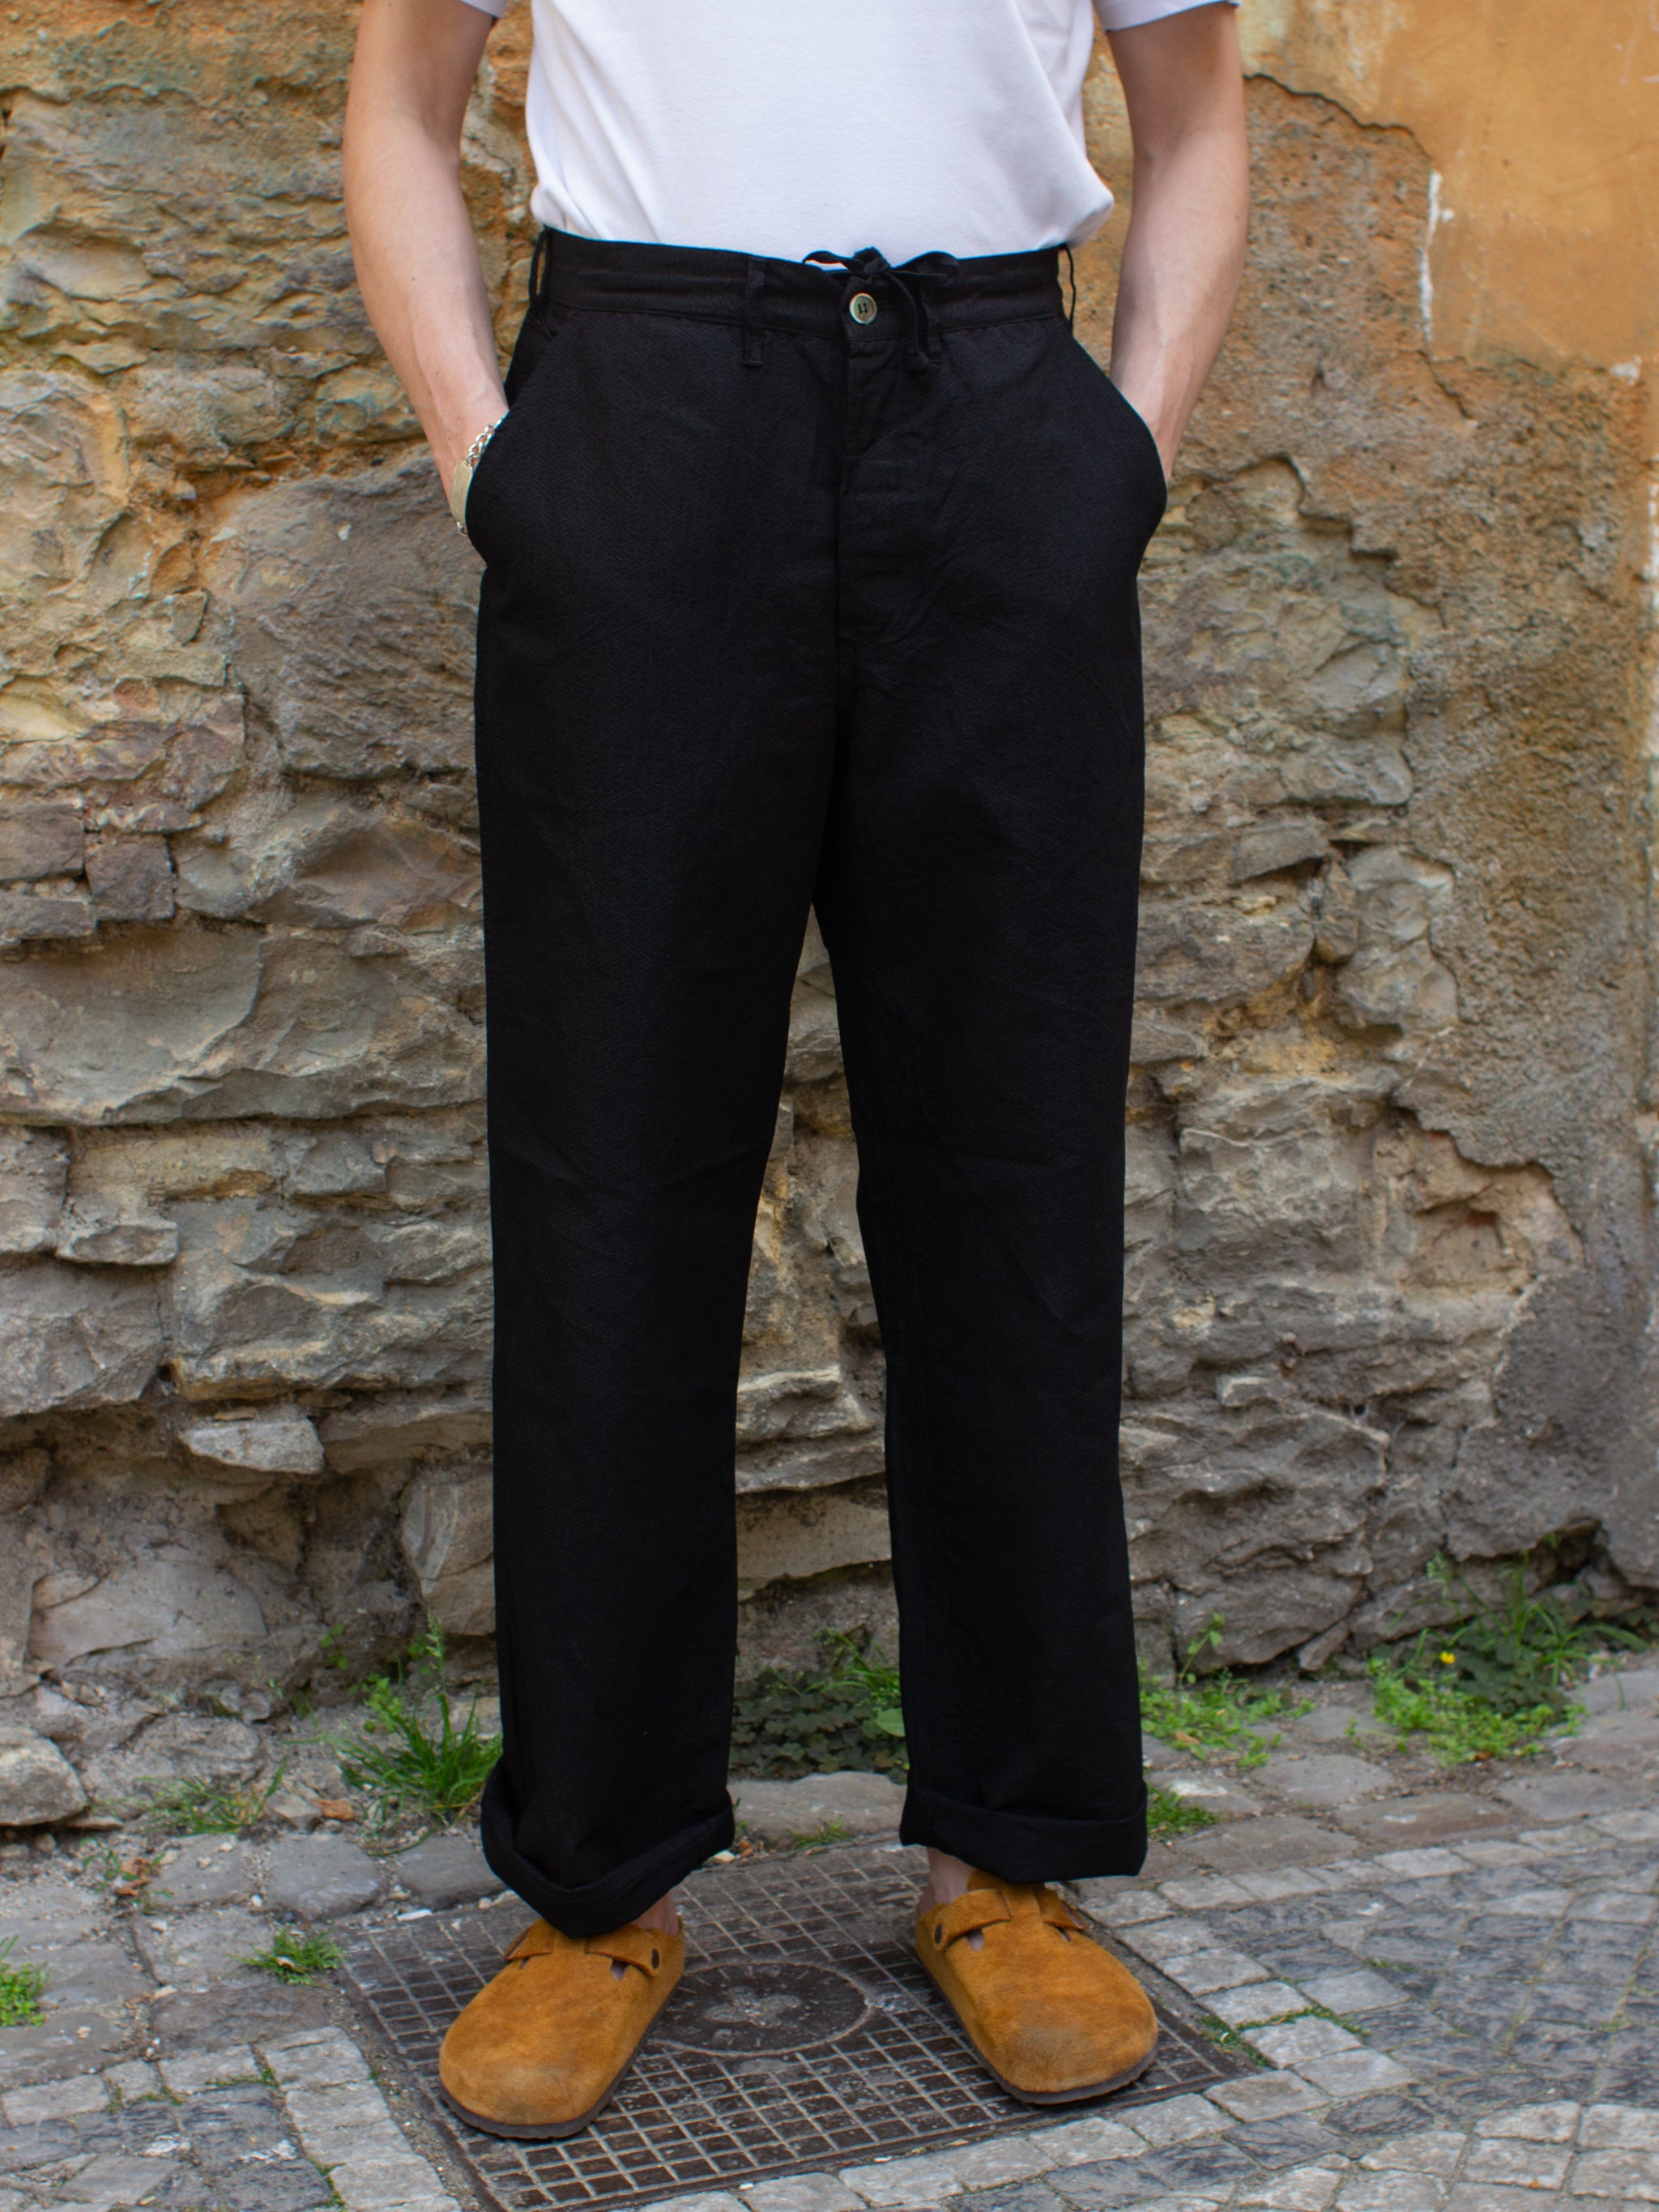 The Cute Elastic Waist Pants You Need To Embrace (And No, They're Not  Sweats) - FLEETSTREET